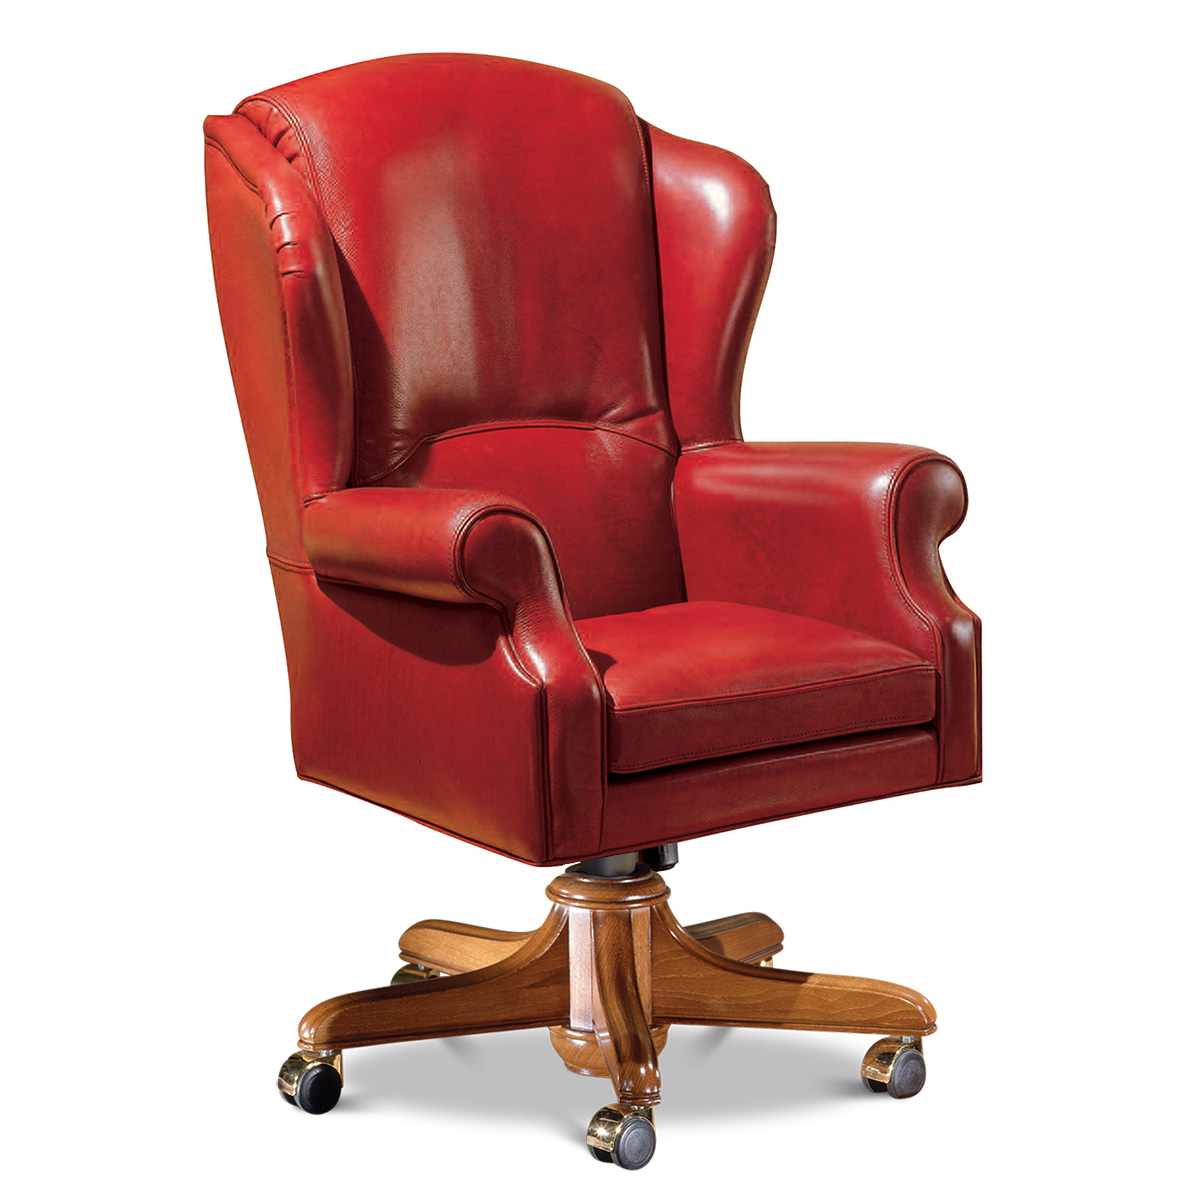 Office armchair “ROYAL” made in italy su misura